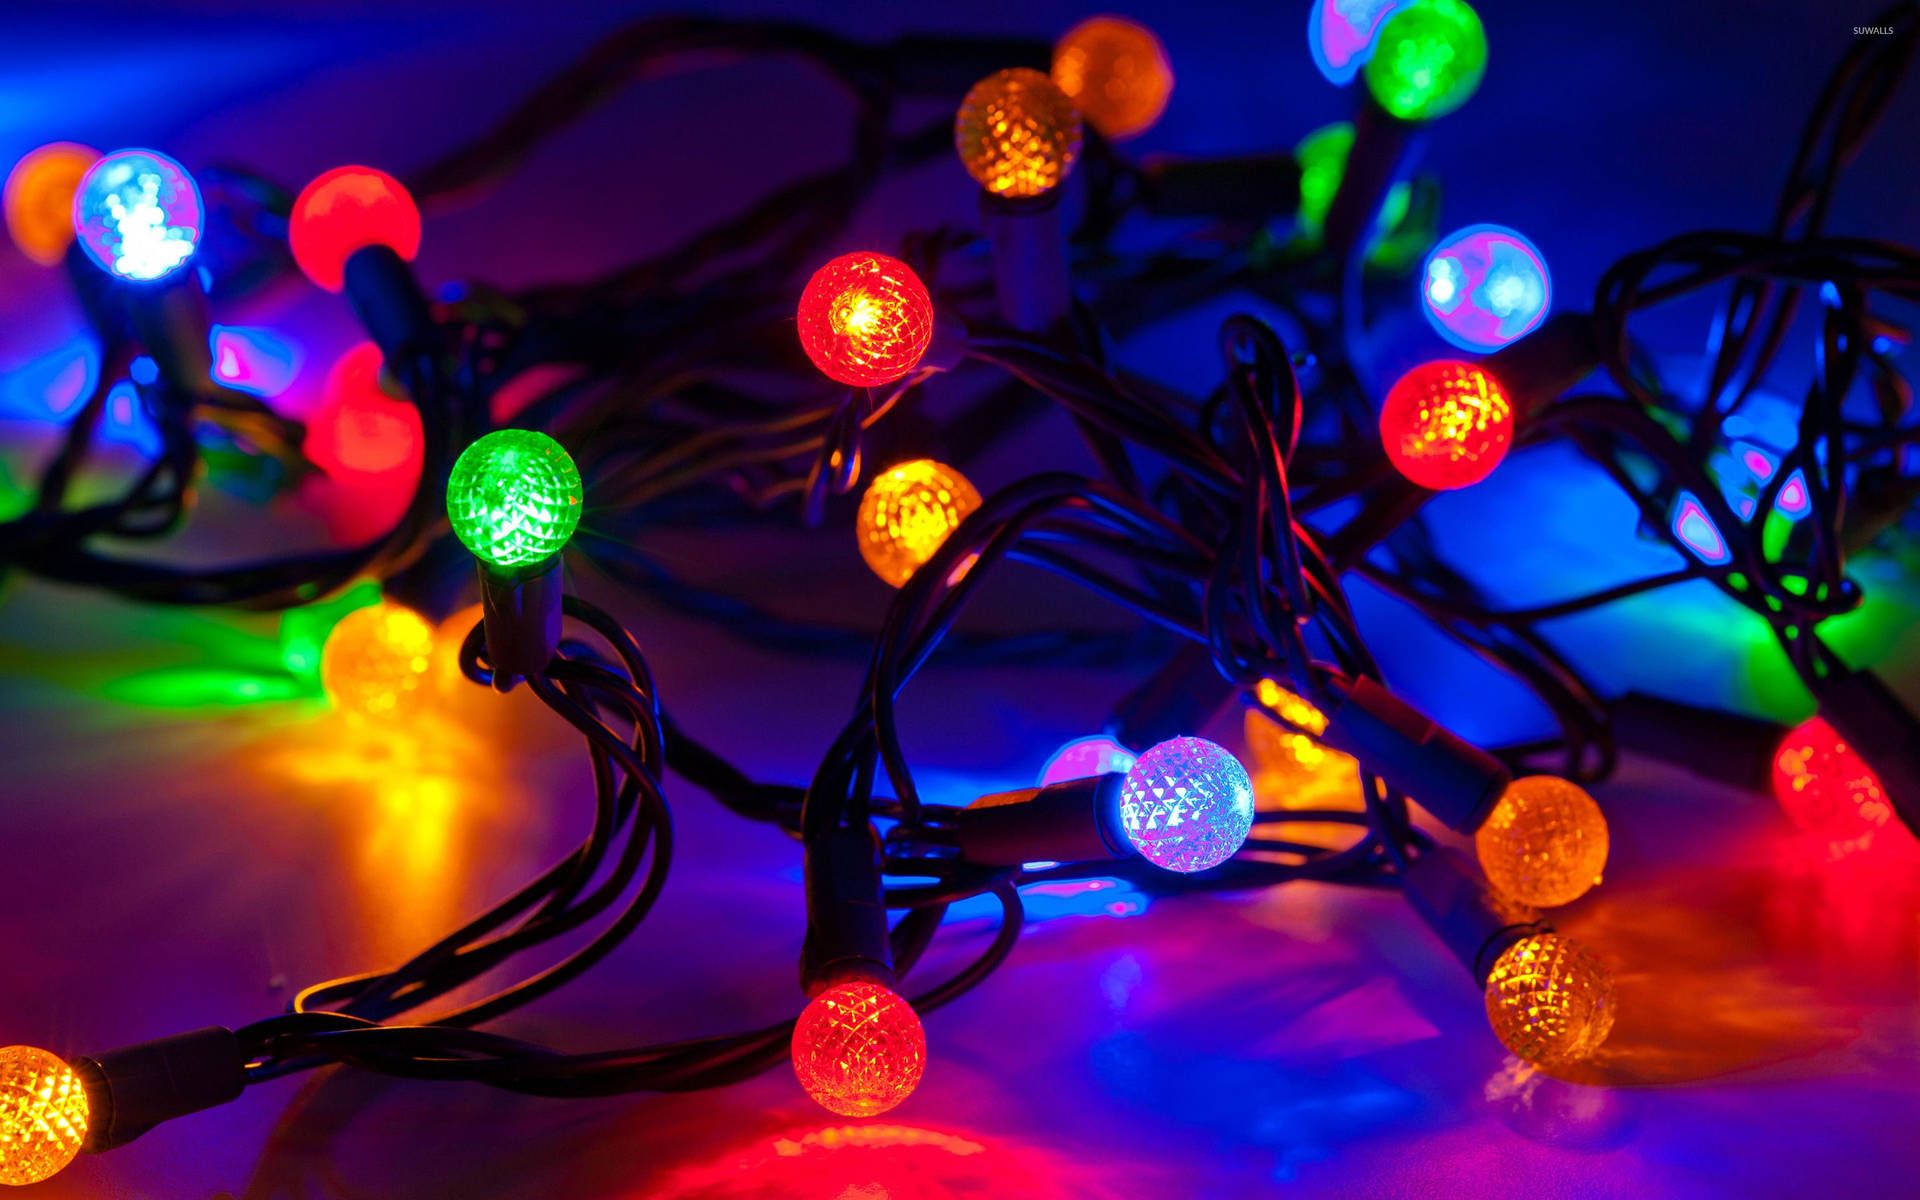 A colorful string of Christmas lights wallpaper 1920x1200 Christmas 1920x1200 - Christmas lights